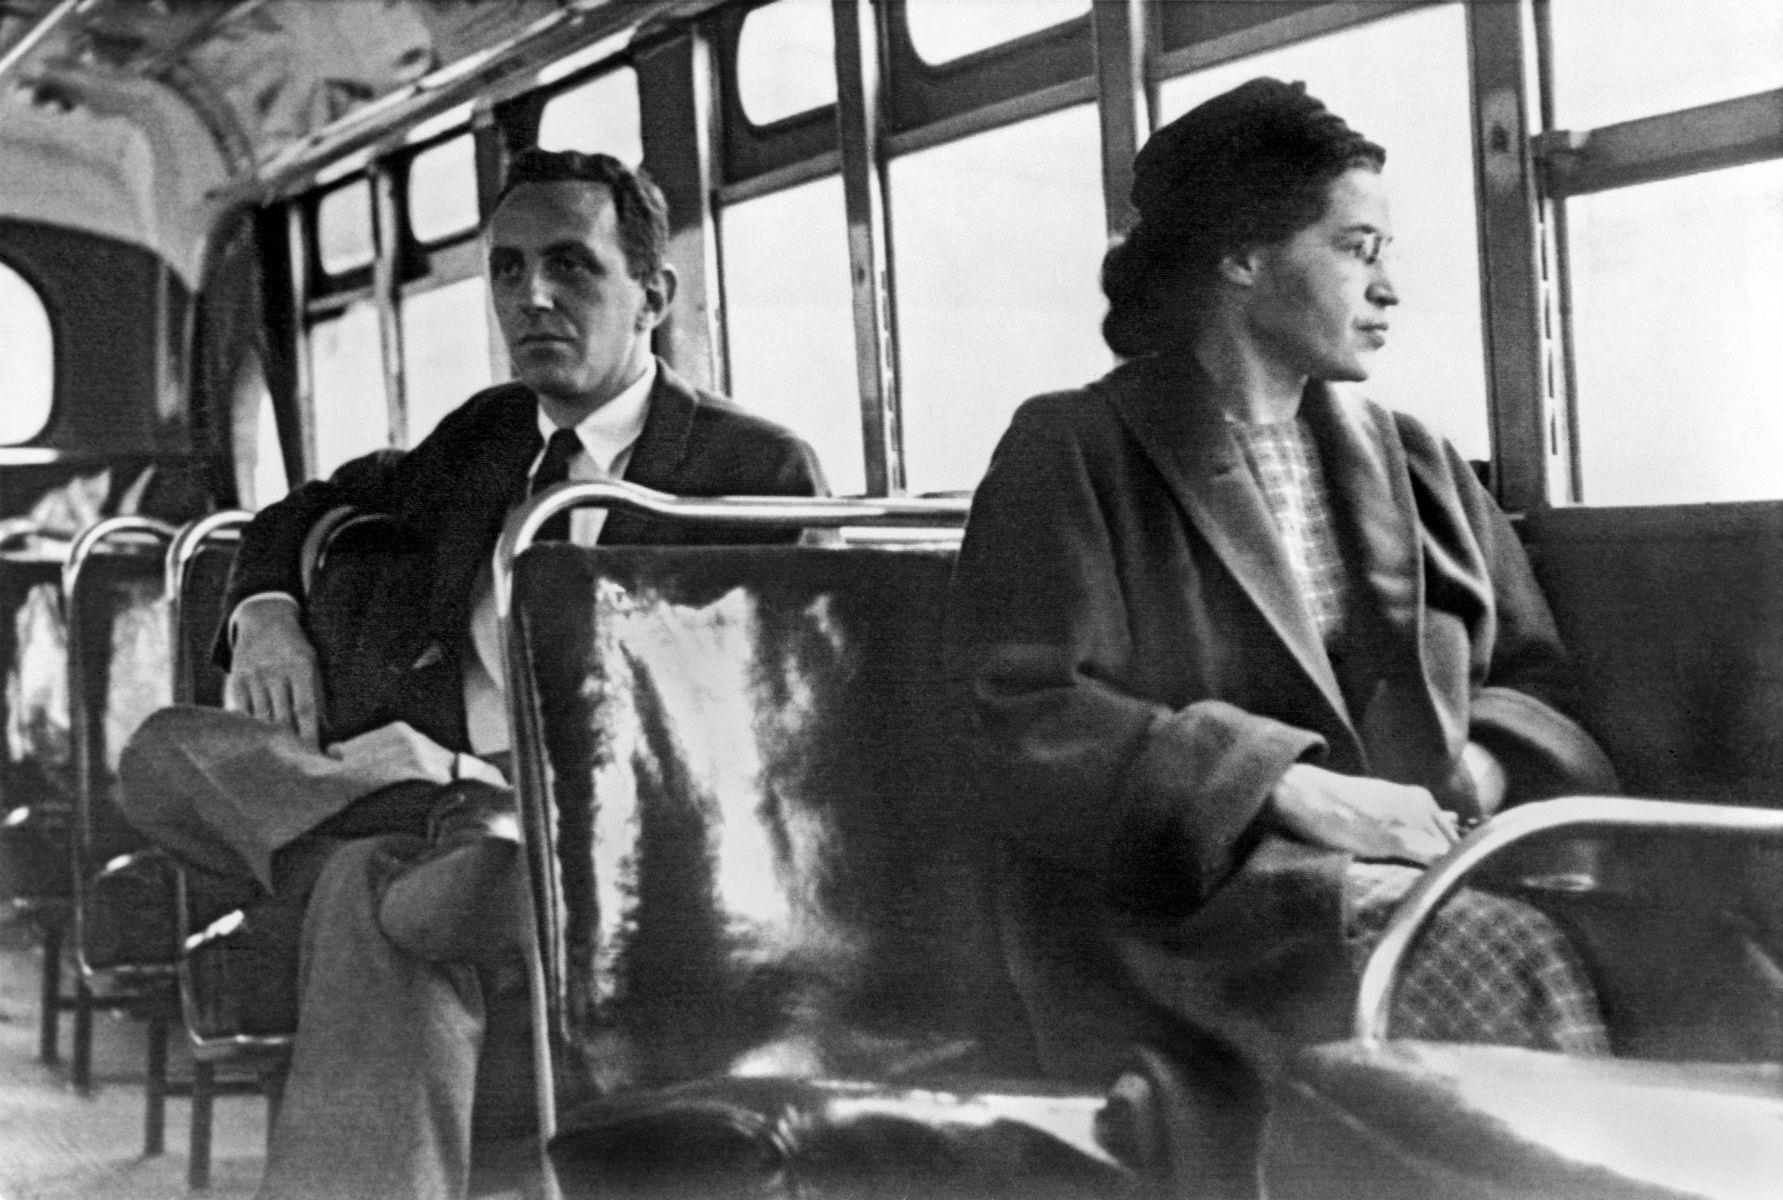 Rosa Parks became an <a href="https://www.womenshistory.org/education-resources/biographies/rosa-parks" rel="noreferrer noopener">icon of the American civil rights movement</a> after refusing to give up her seat on a bus to a white passenger in 1955. This event triggered the <a href="https://www.history.com/topics/black-history/montgomery-bus-boycott" rel="noreferrer noopener">Montgomery bus boycott</a> under the leadership of Martin Luther King Jr. In fact, Rosa Parks was not the first to dare to challenge racial segregation in Alabama's transportation system. <a href="https://slate.com/news-and-politics/2002/09/is-barbershop-right-about-rosa-parks.html" rel="noreferrer noopener">Claudette Colvin and Mary Louise Smith</a> preceded her but were deemed unworthy to represent the movement.